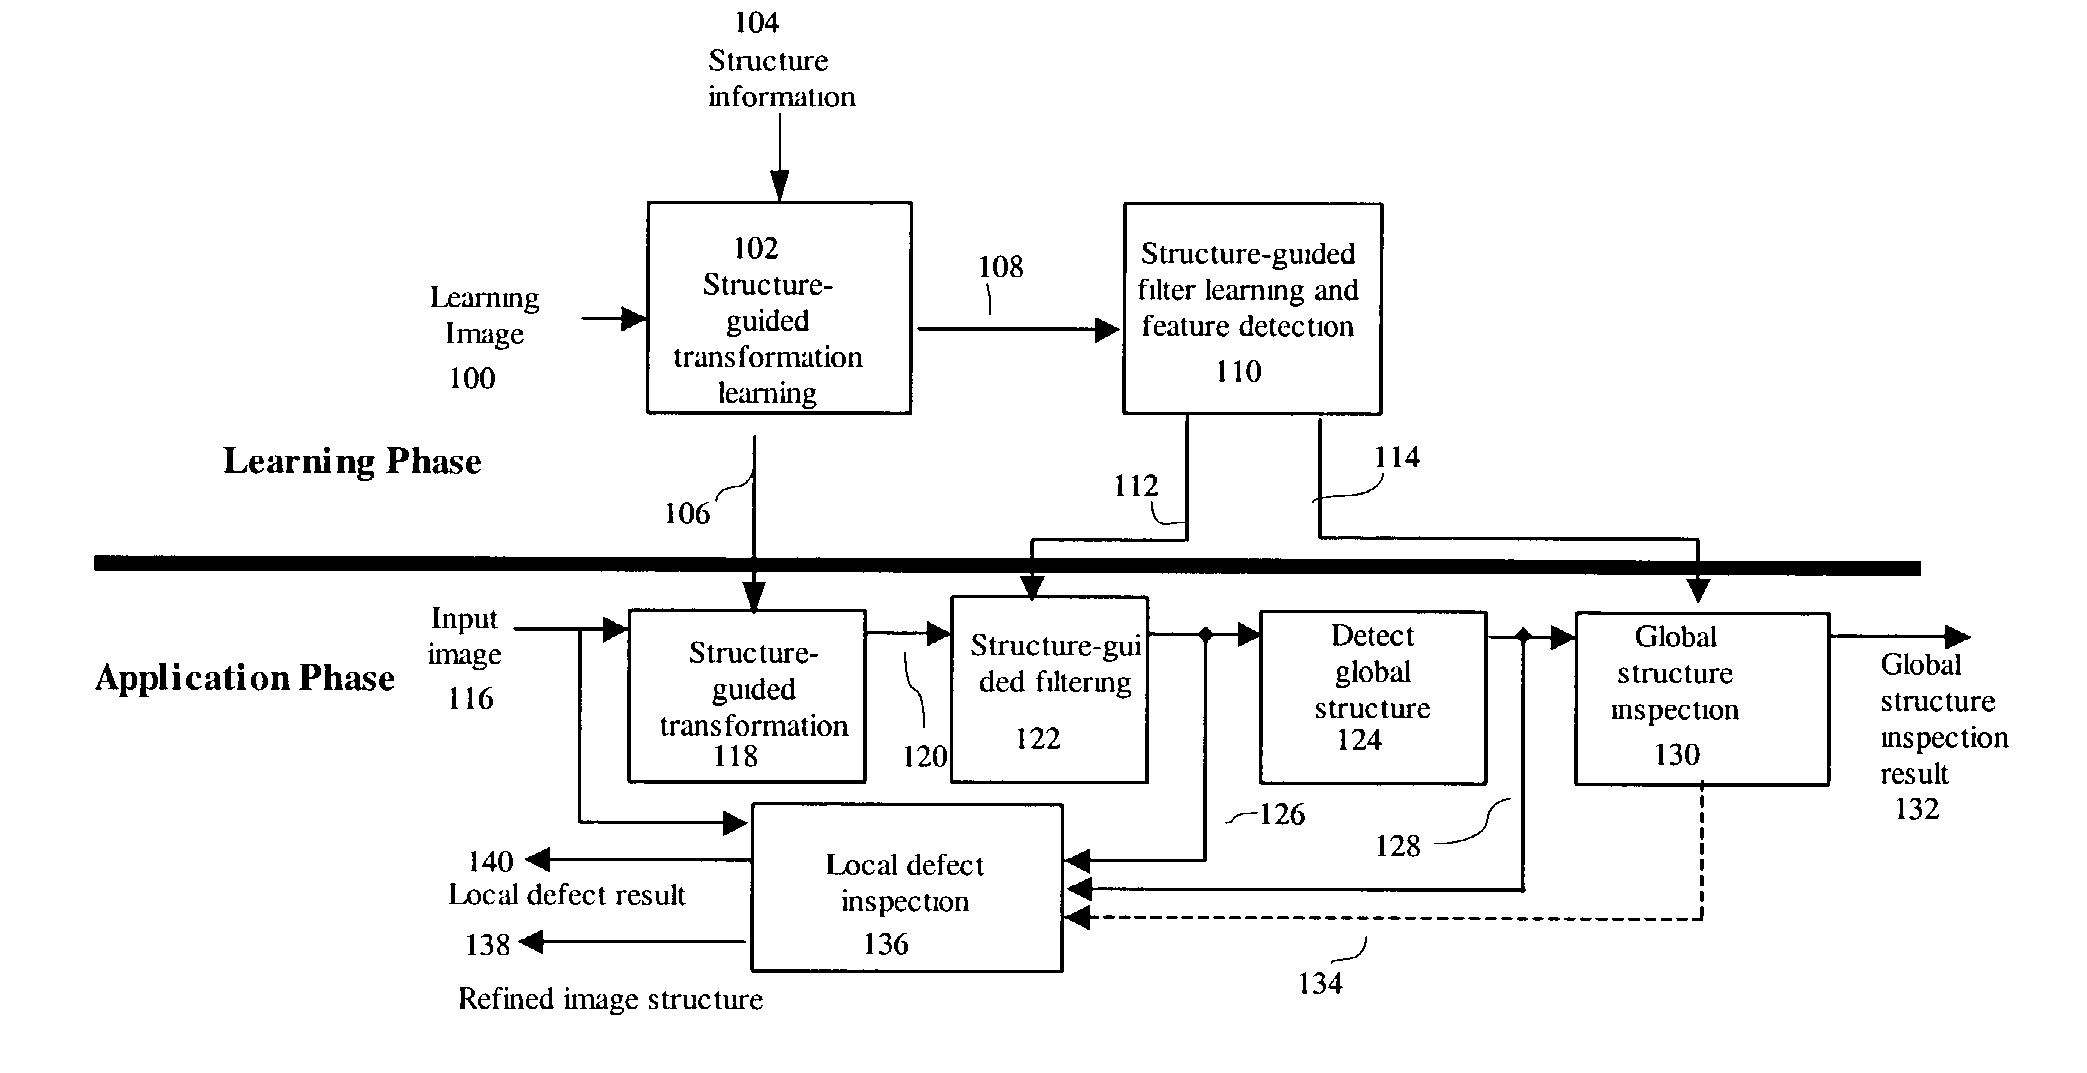 Structure-guided image inspection